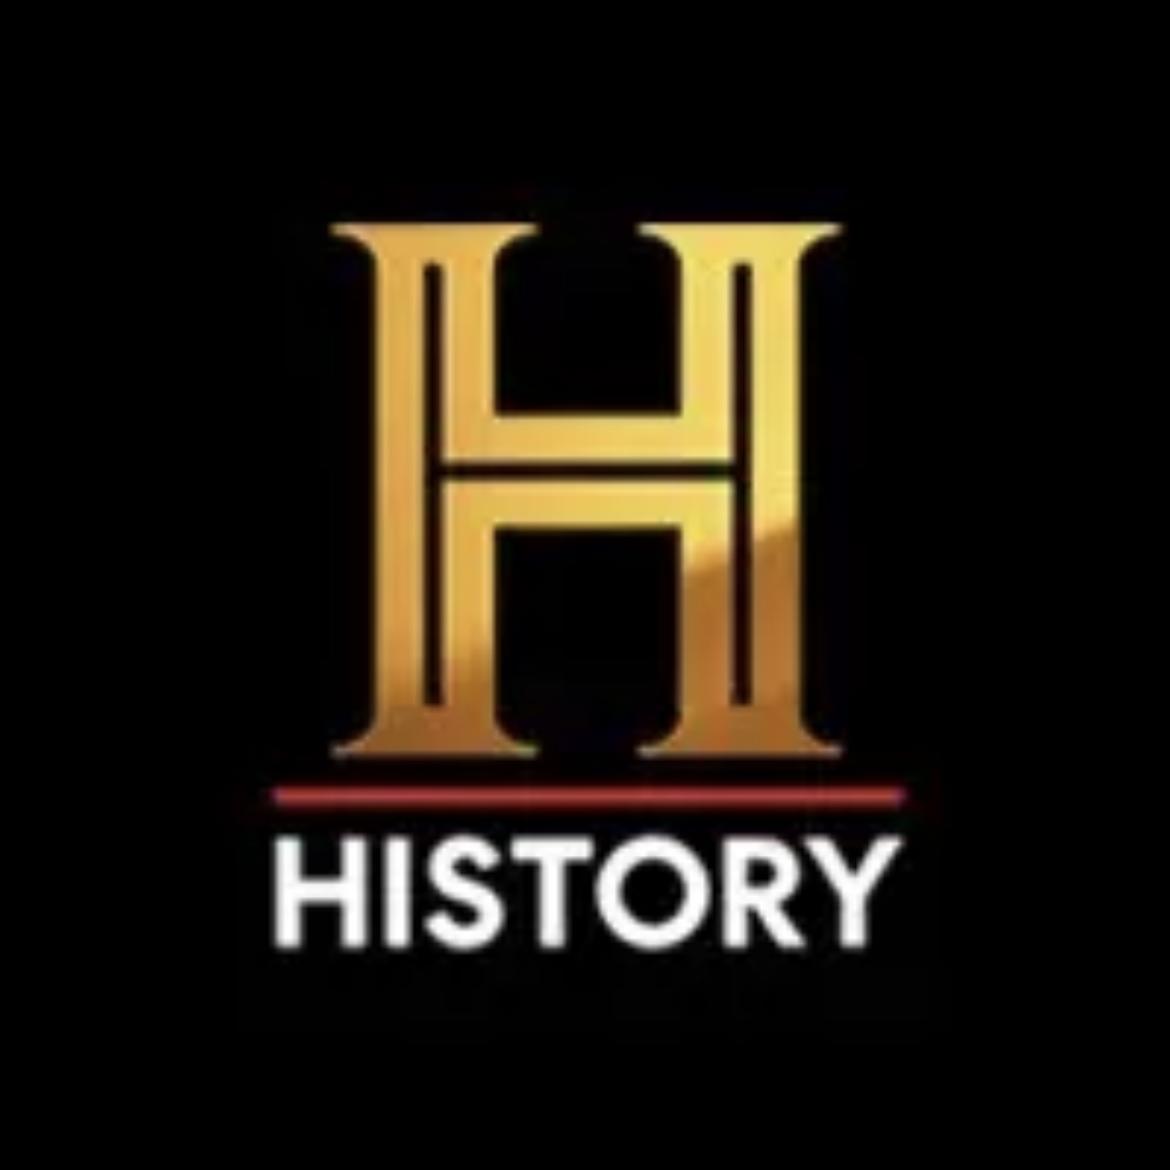 History channel's images